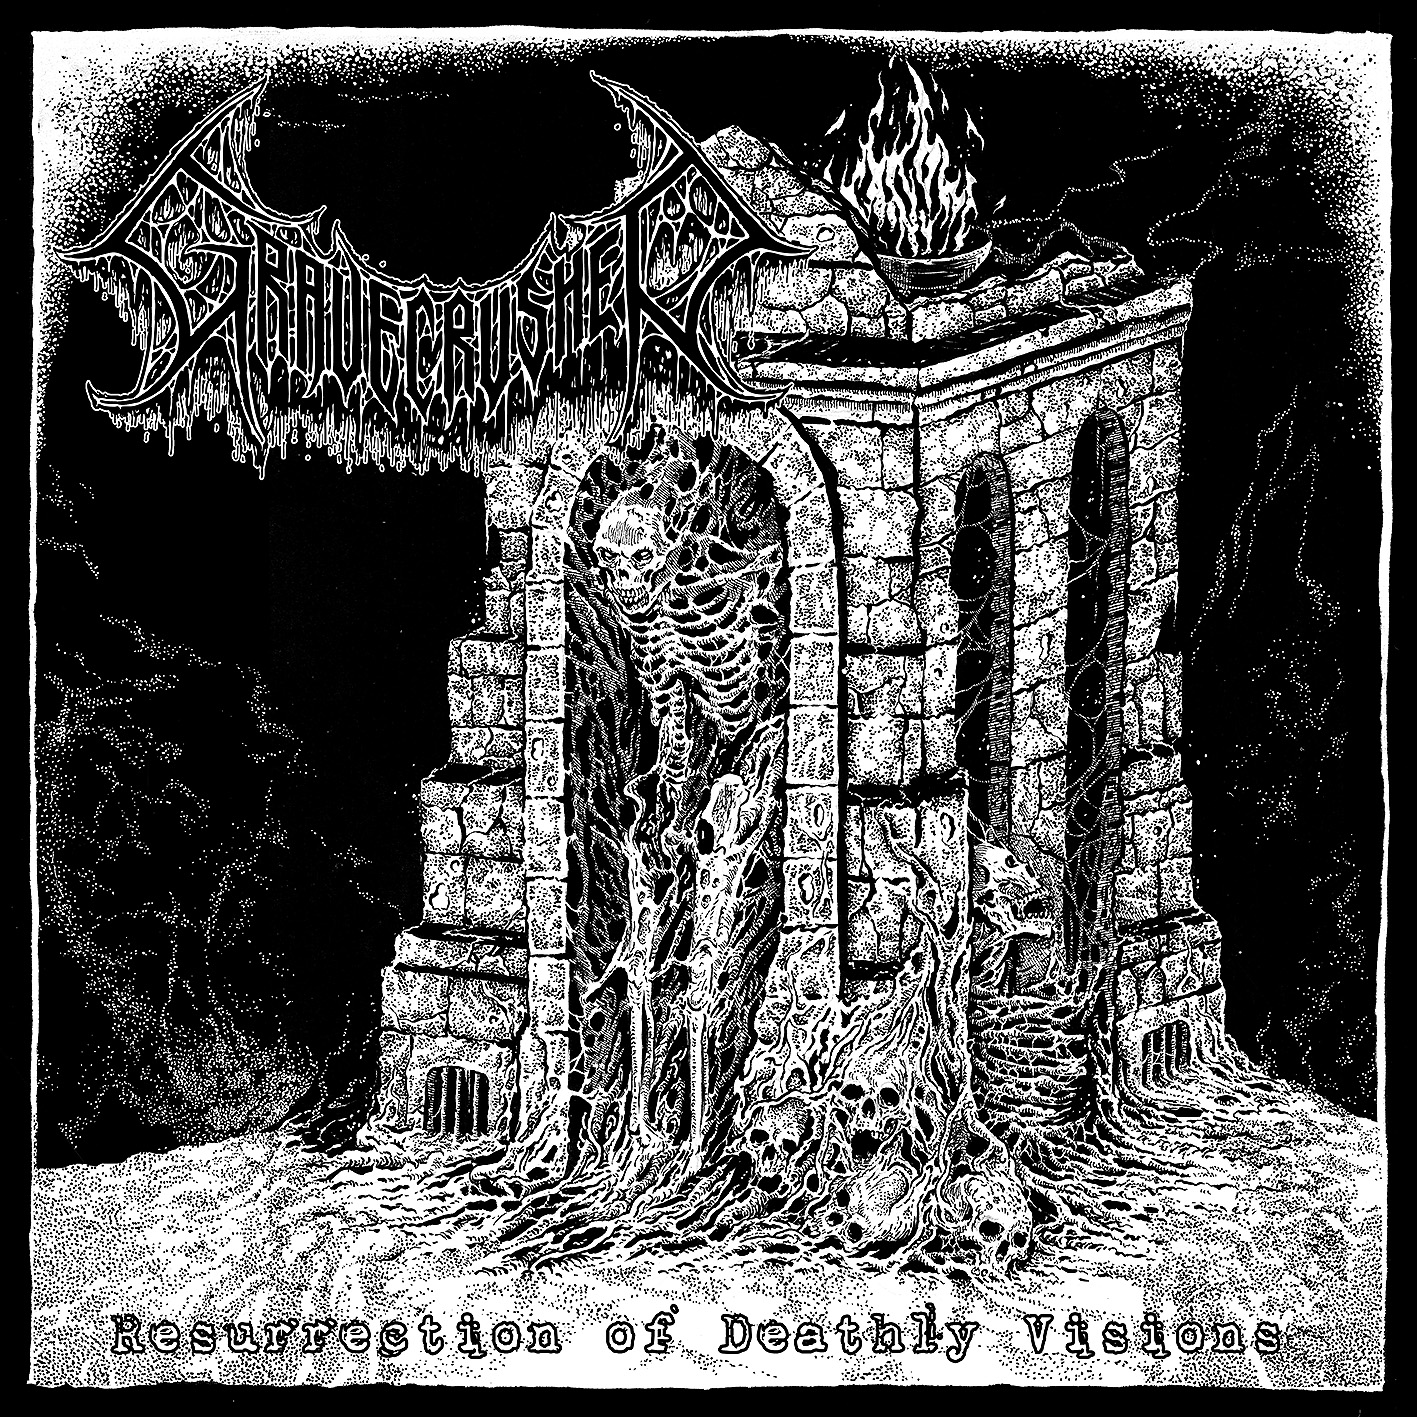 gravecrusher – resurrection of deathly visions [ep]